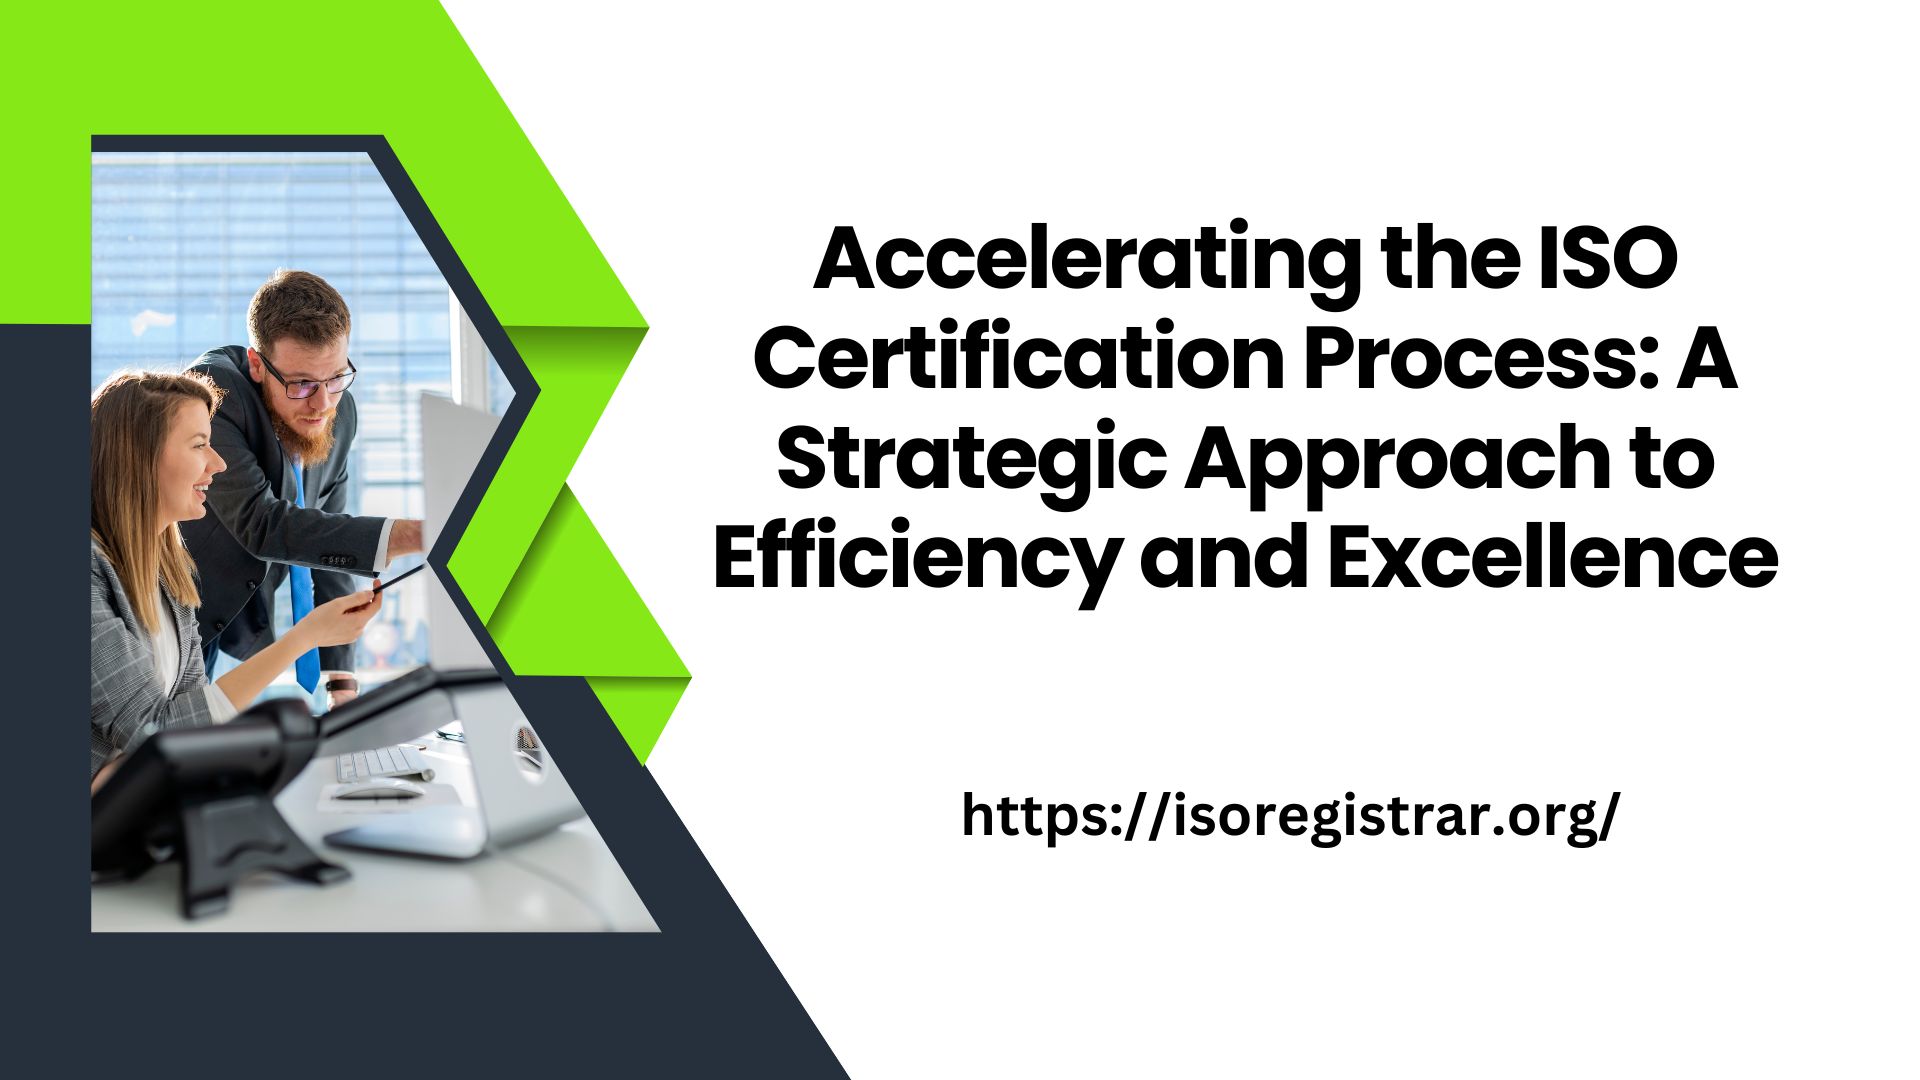 Accelerating the ISO Certification Process: A Strategic Approach to Efficiency and Excellence